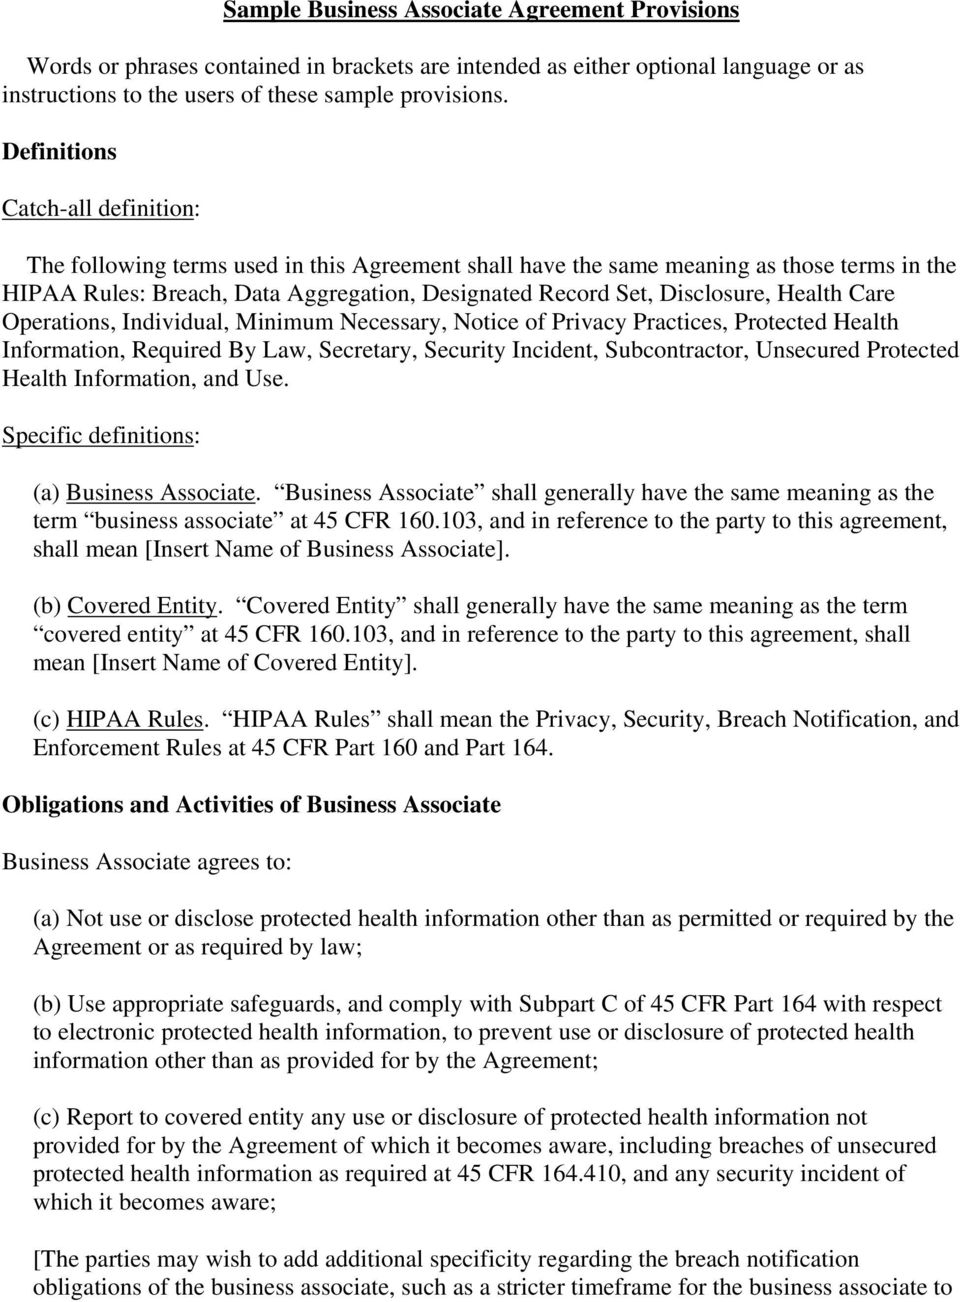 Sample Business Associate Agreement Provisions – Pdf Free For Hipaa Business Associate Agreement Template